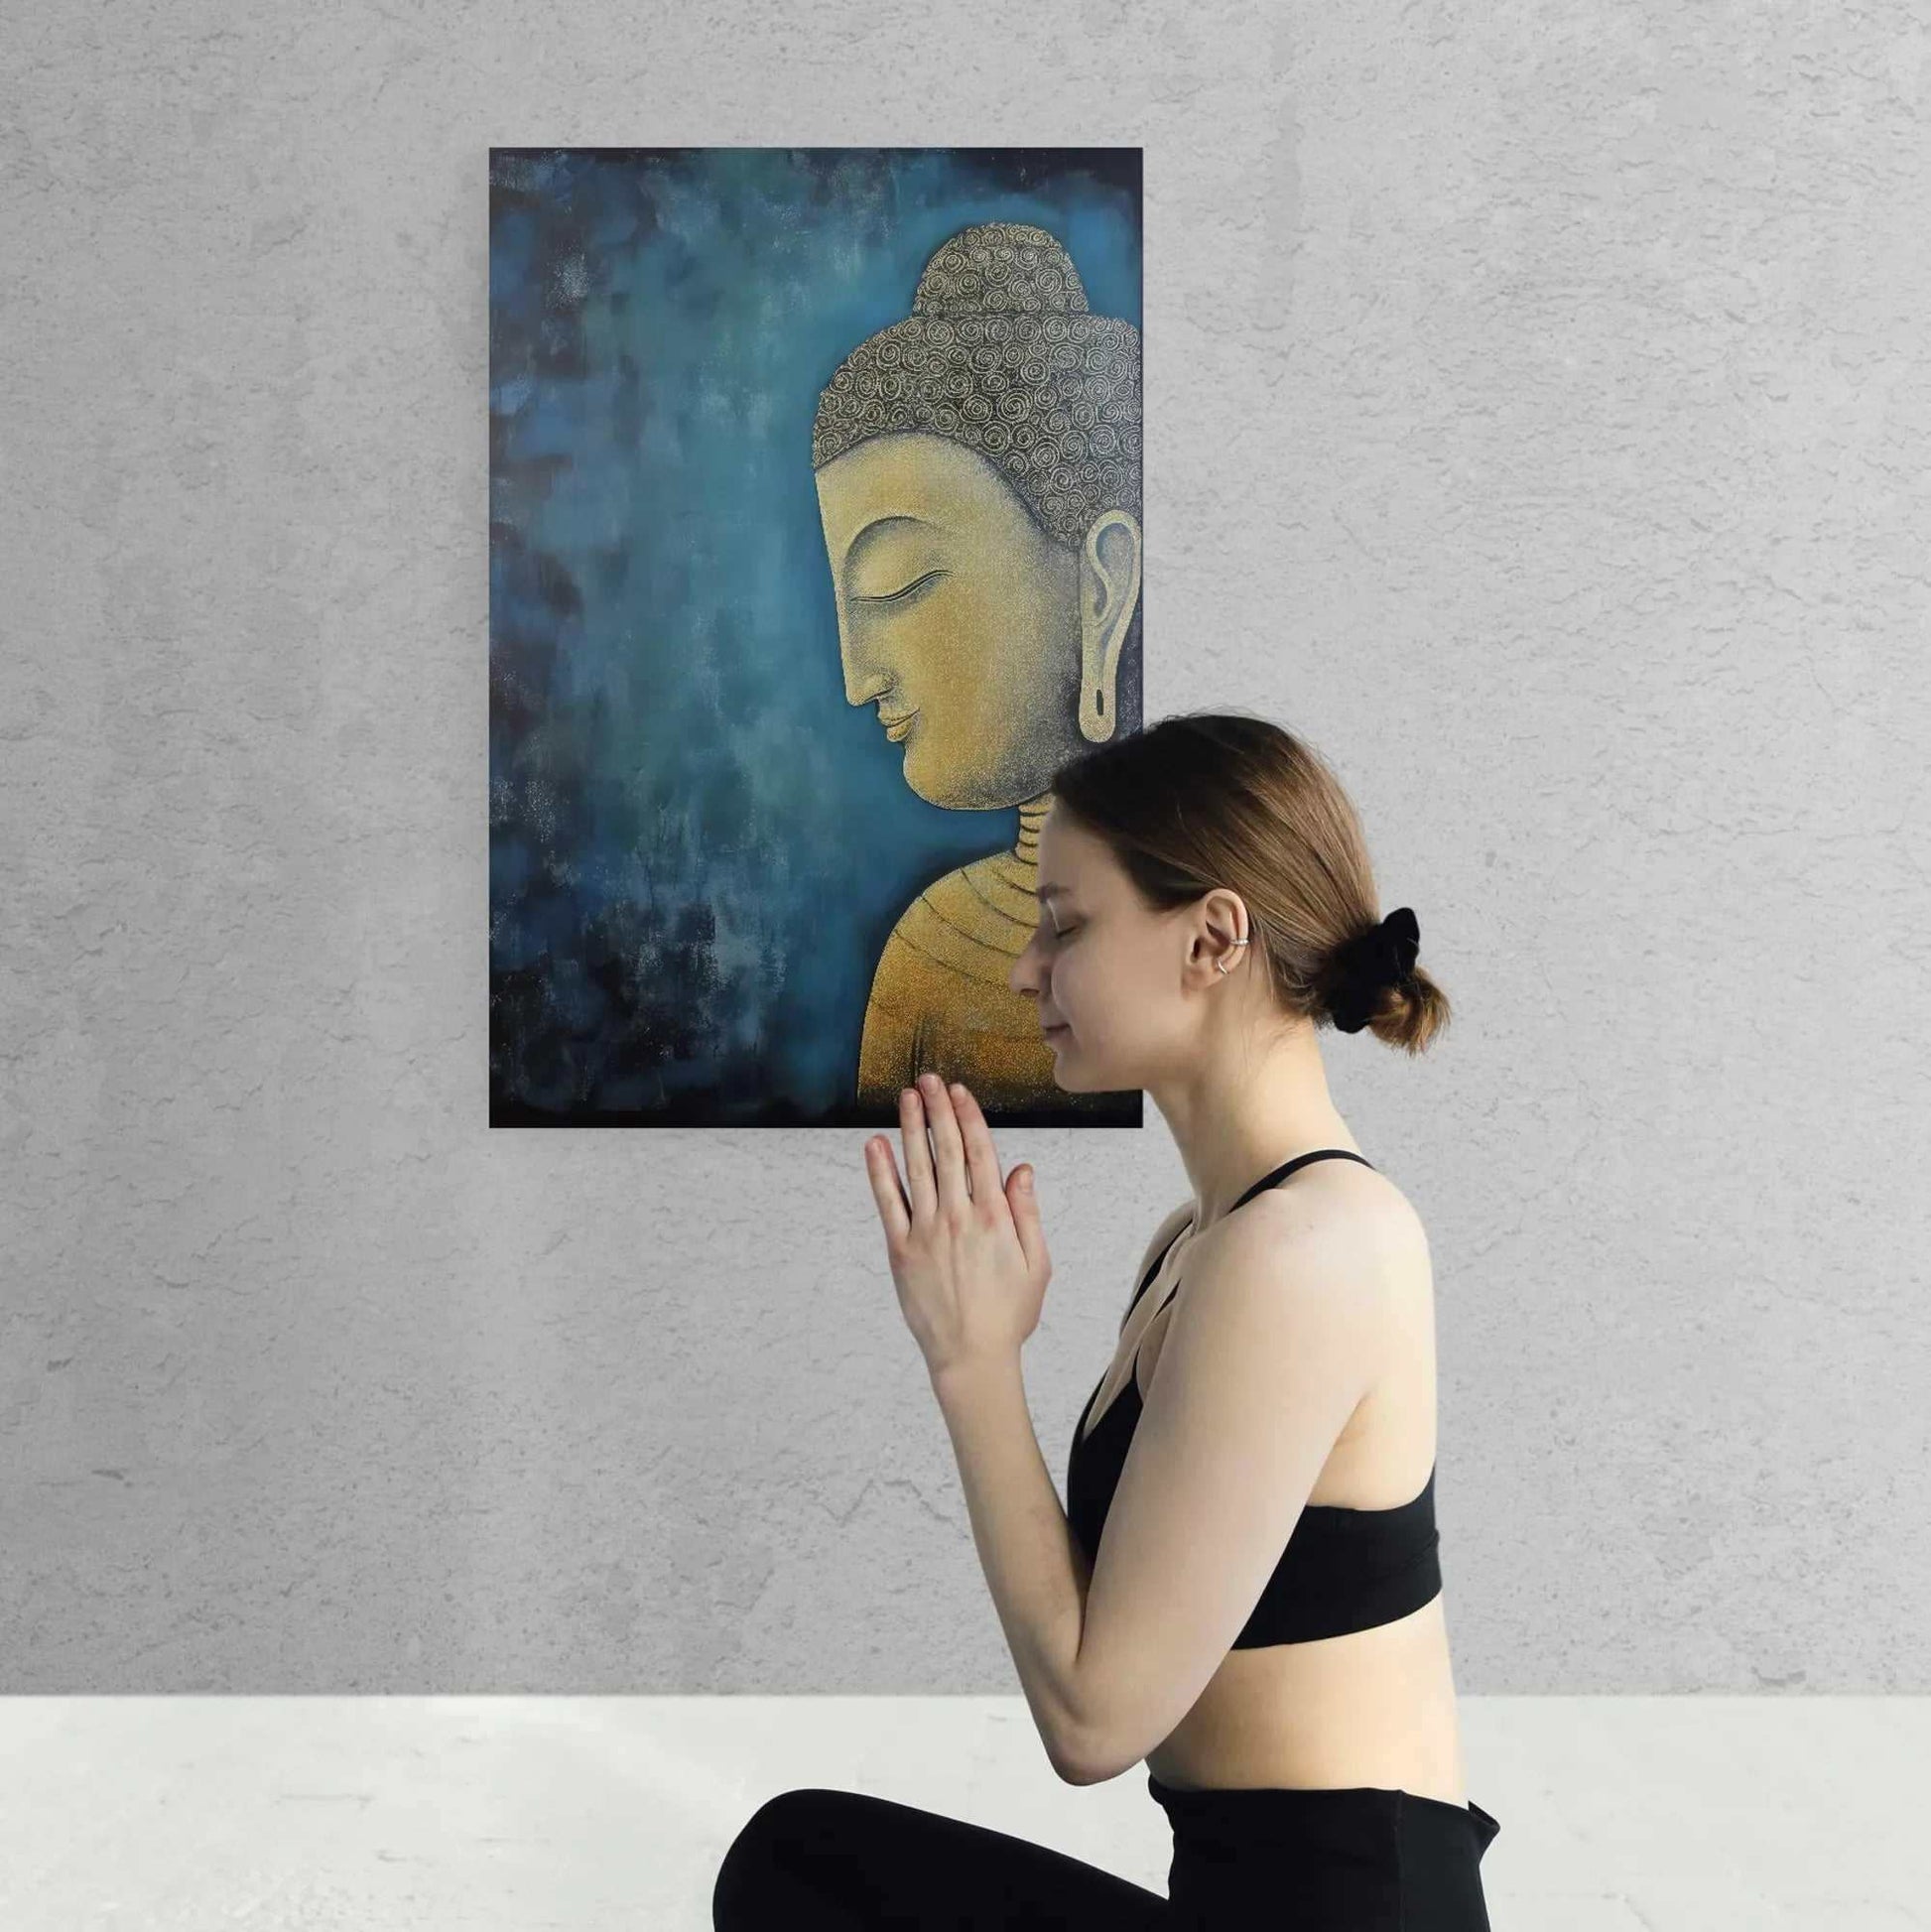 Young woman in black sportswear practicing meditation in front of a textured Buddha painting with gold and blue hues.